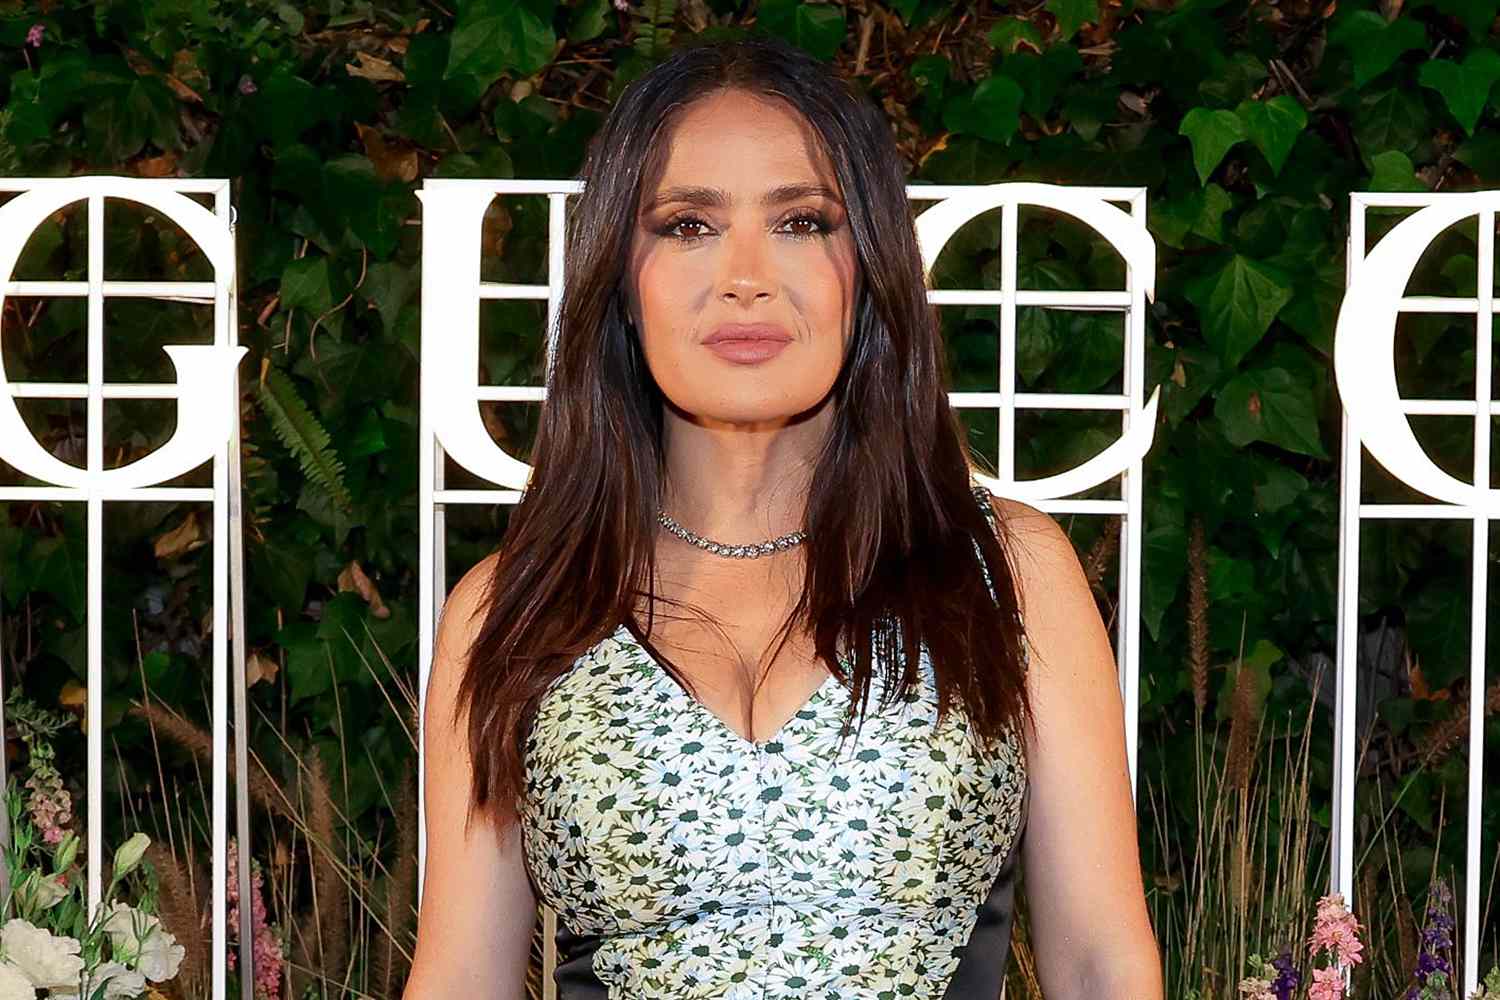 Salma Hayek Dons Optical Illusion Dress That Accentuates Her Hourglass Figure